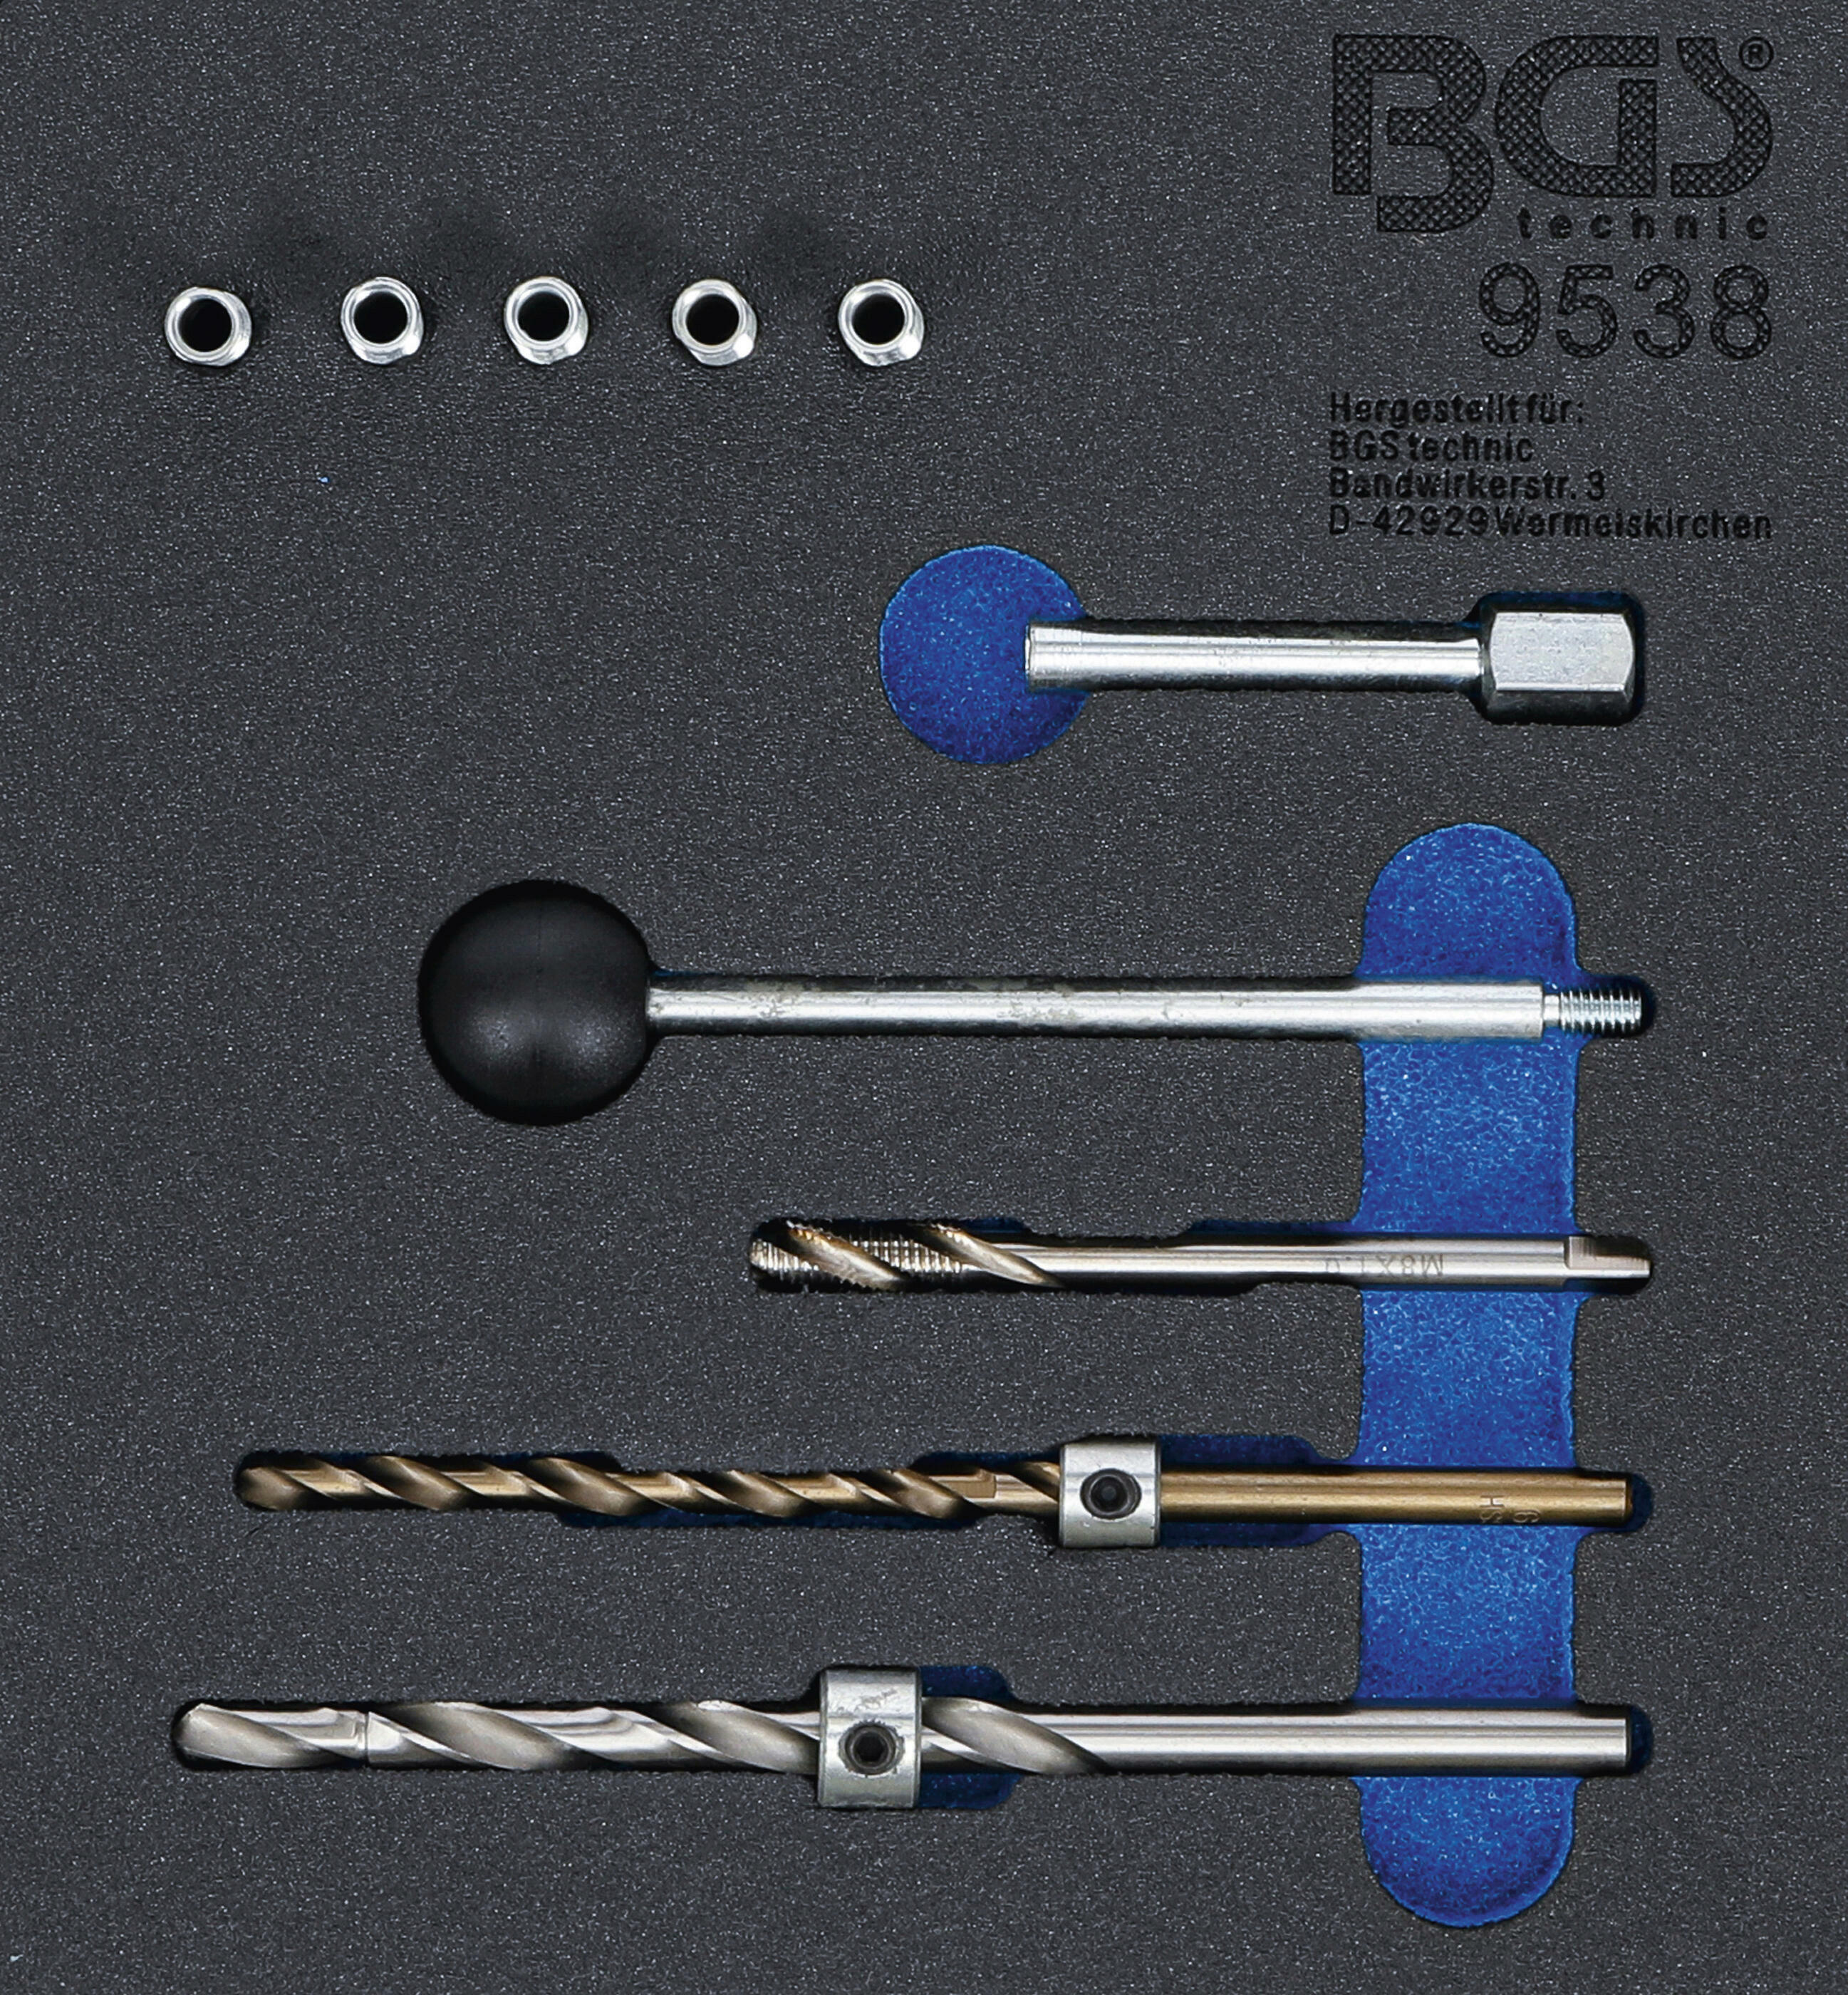 BGS Disassembly Tool Set, common rail injector